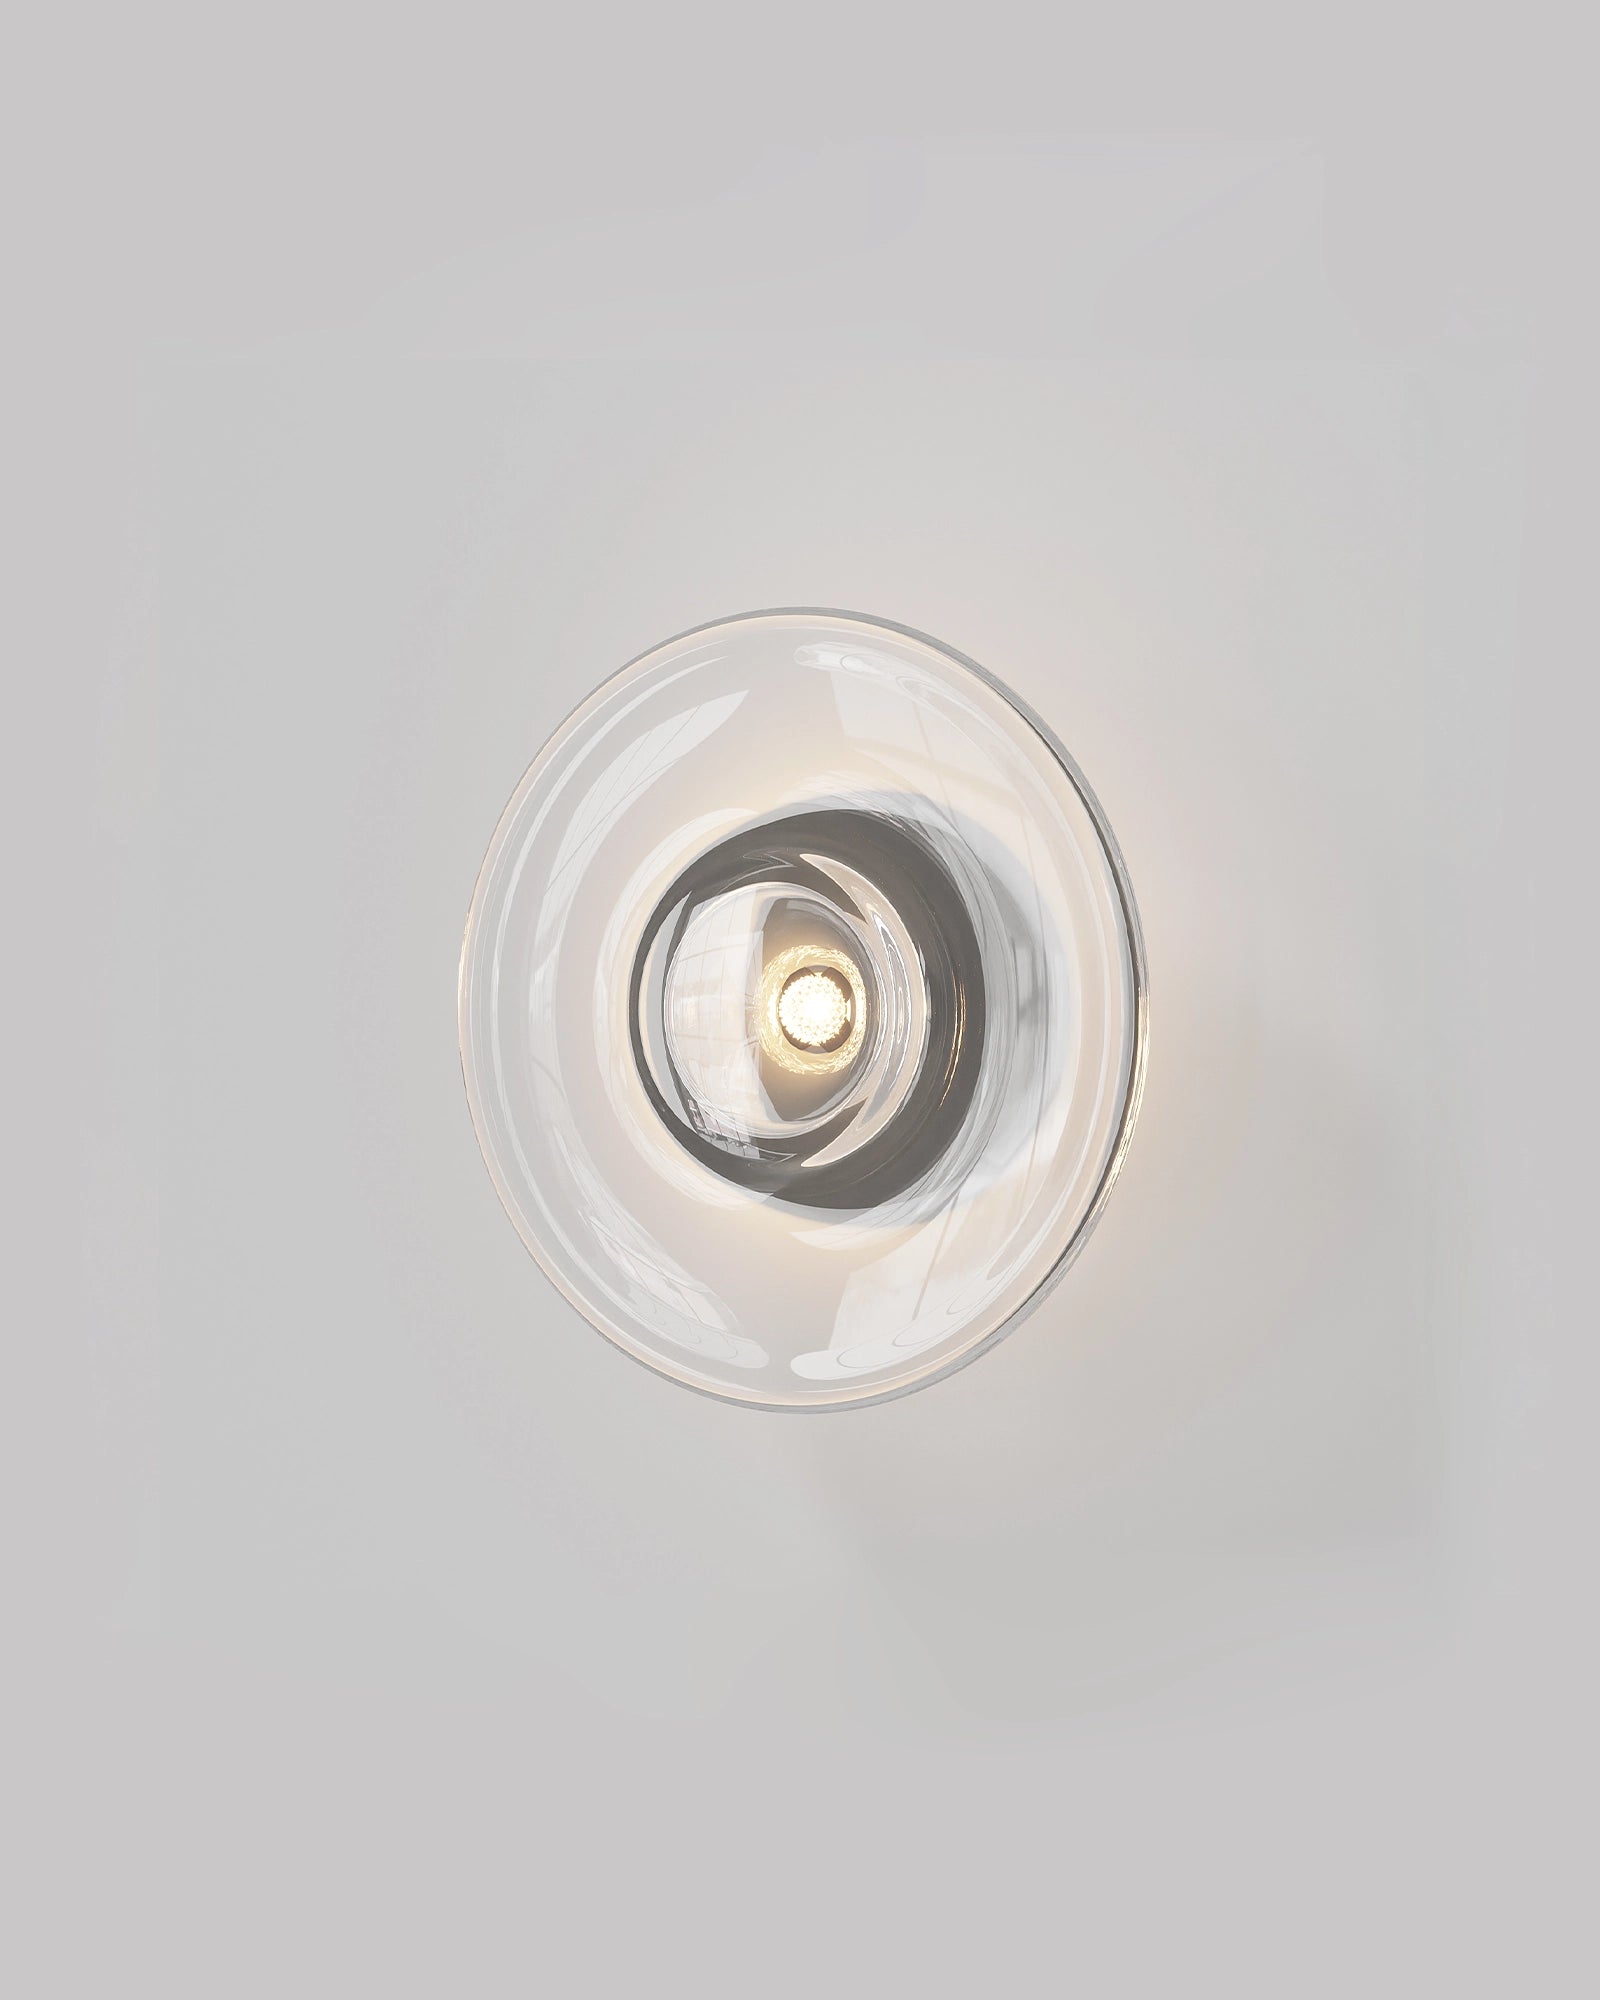 Sol Round Wall light